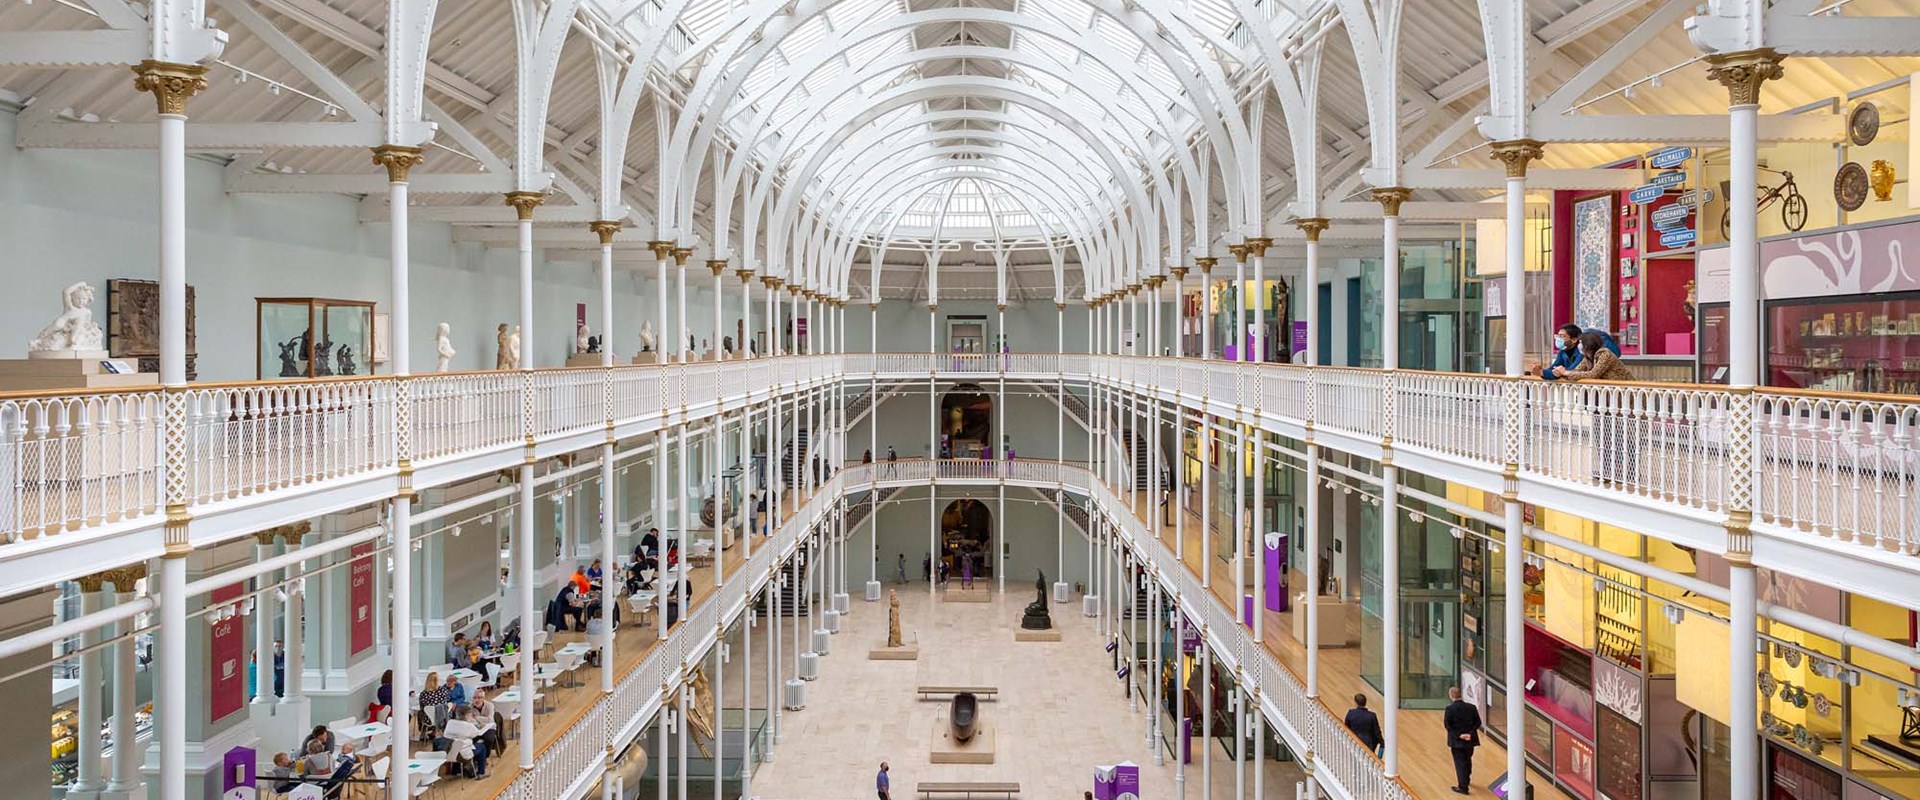 The grand gallery- a large, three-floor atrium space with balconies and galleries running around the perimeter.